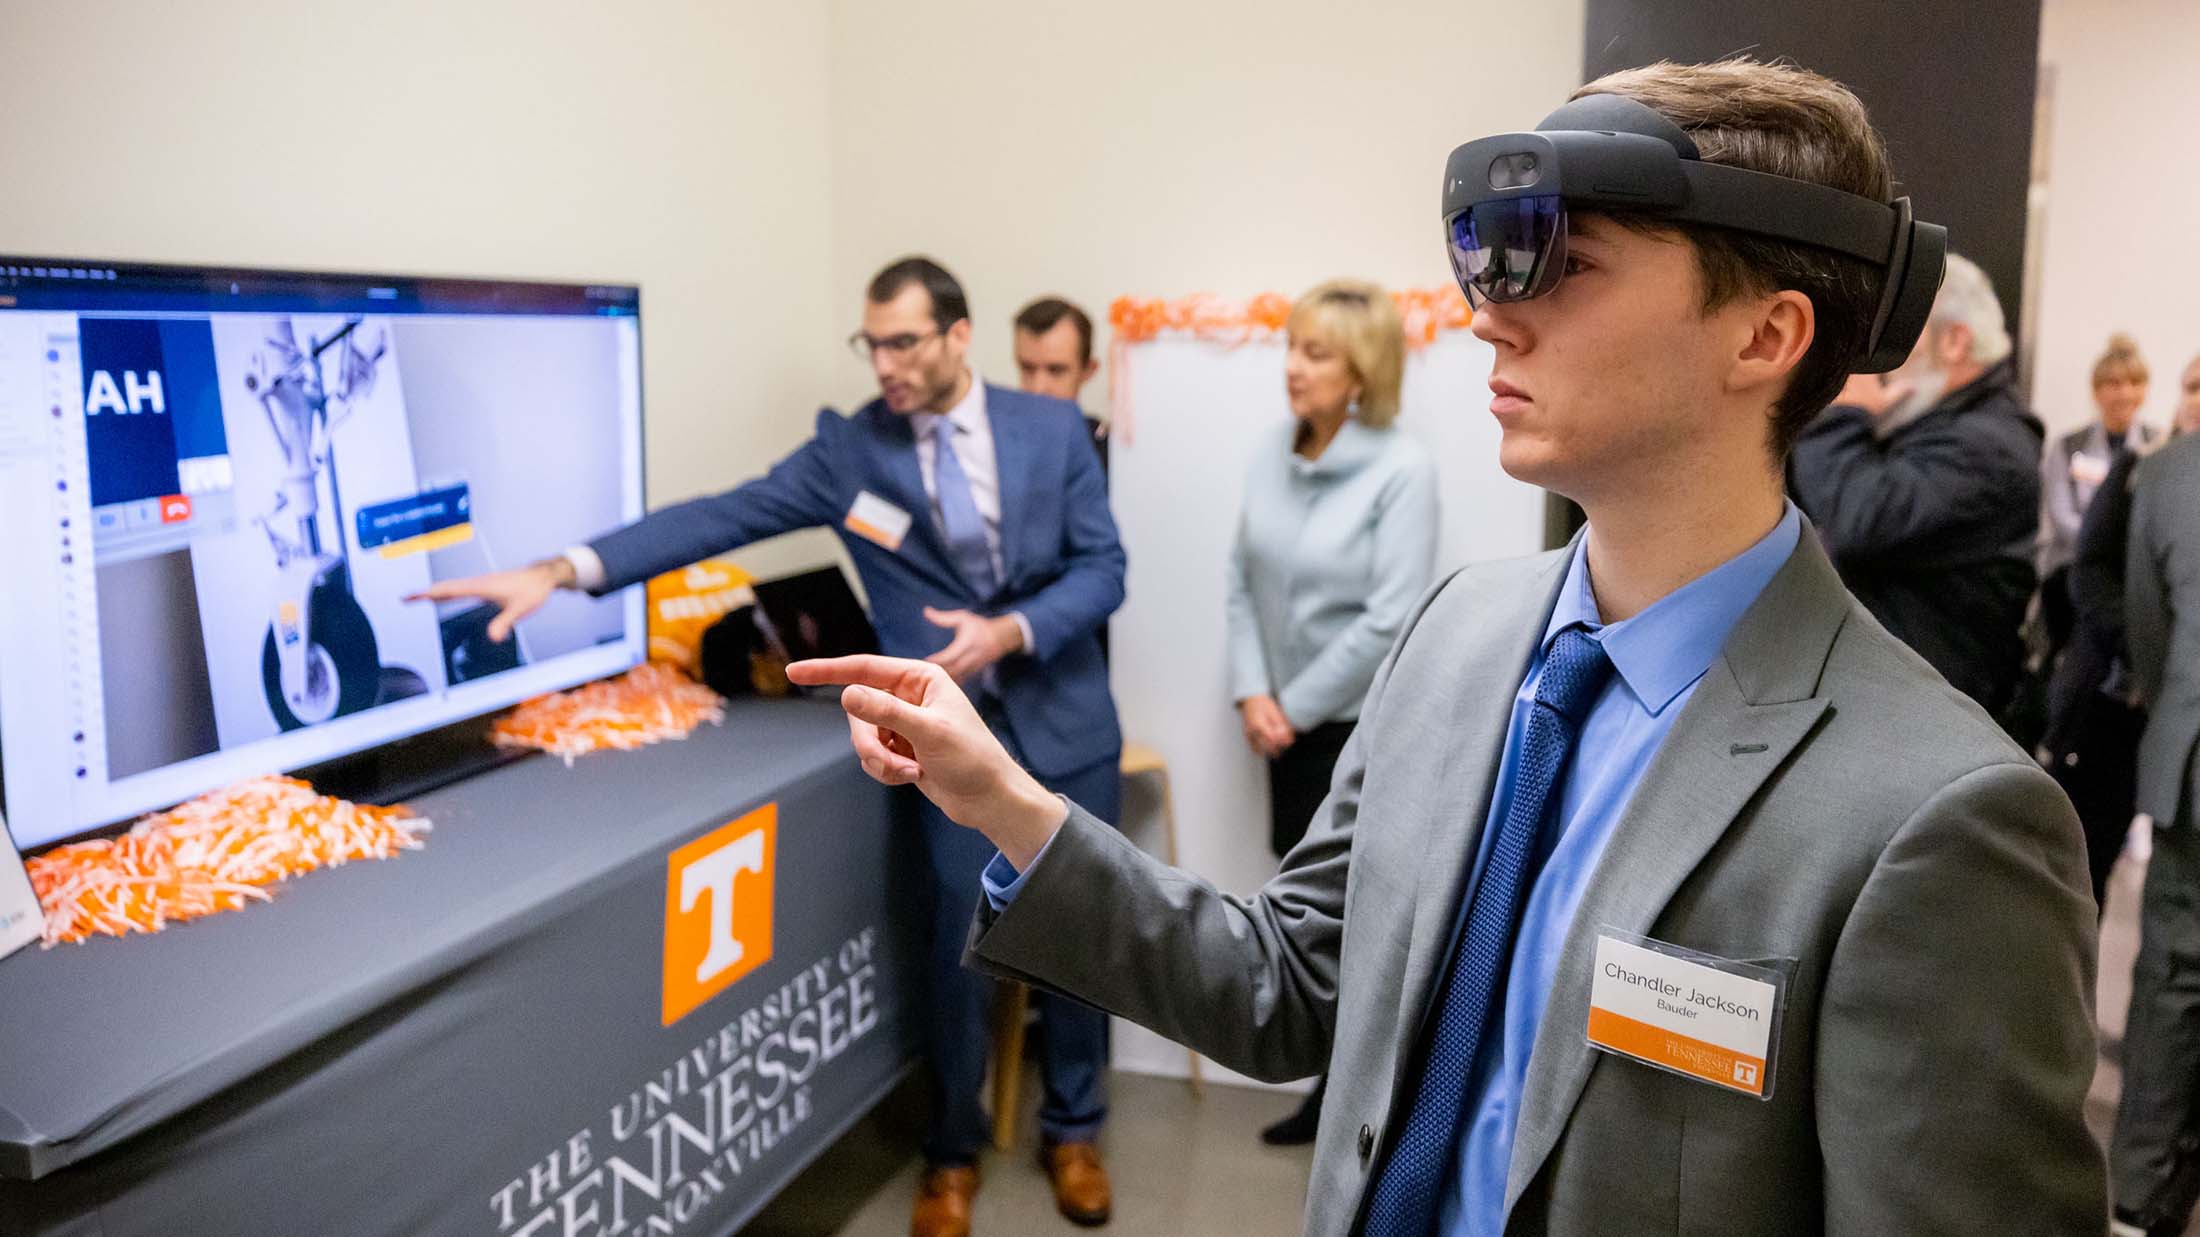 Student wears VR goggles, demonstrating the technology available at the new AT&T lab at UT.